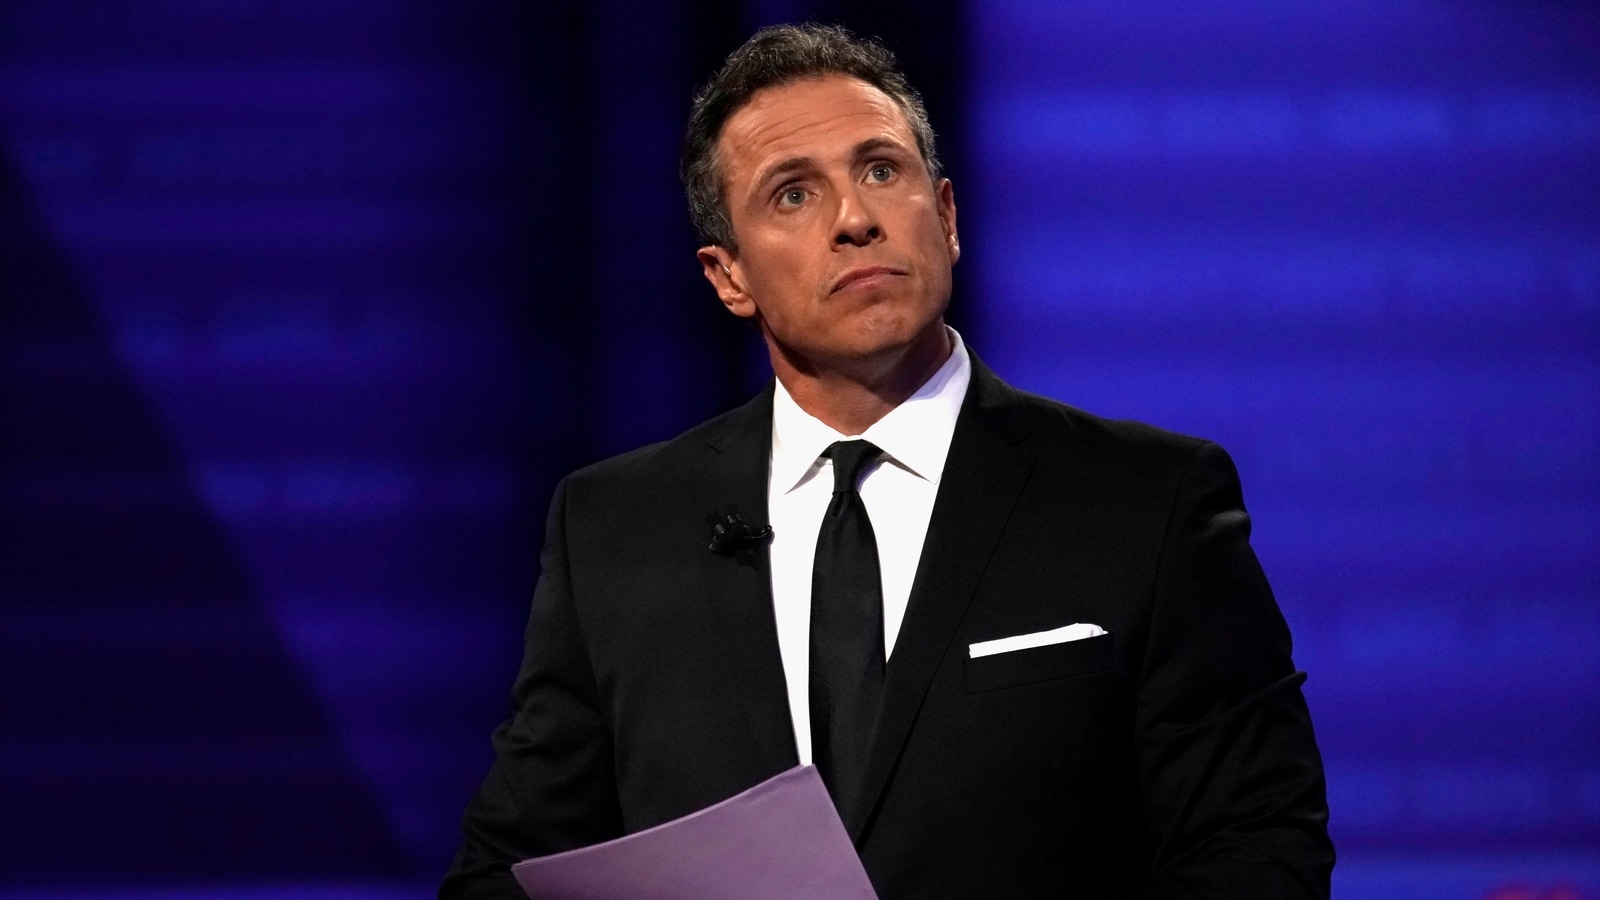 Former CNN host Chris Cuomo says he is ‘open’ to voting for Donald Trump over Joe Biden in 2024's presidential run